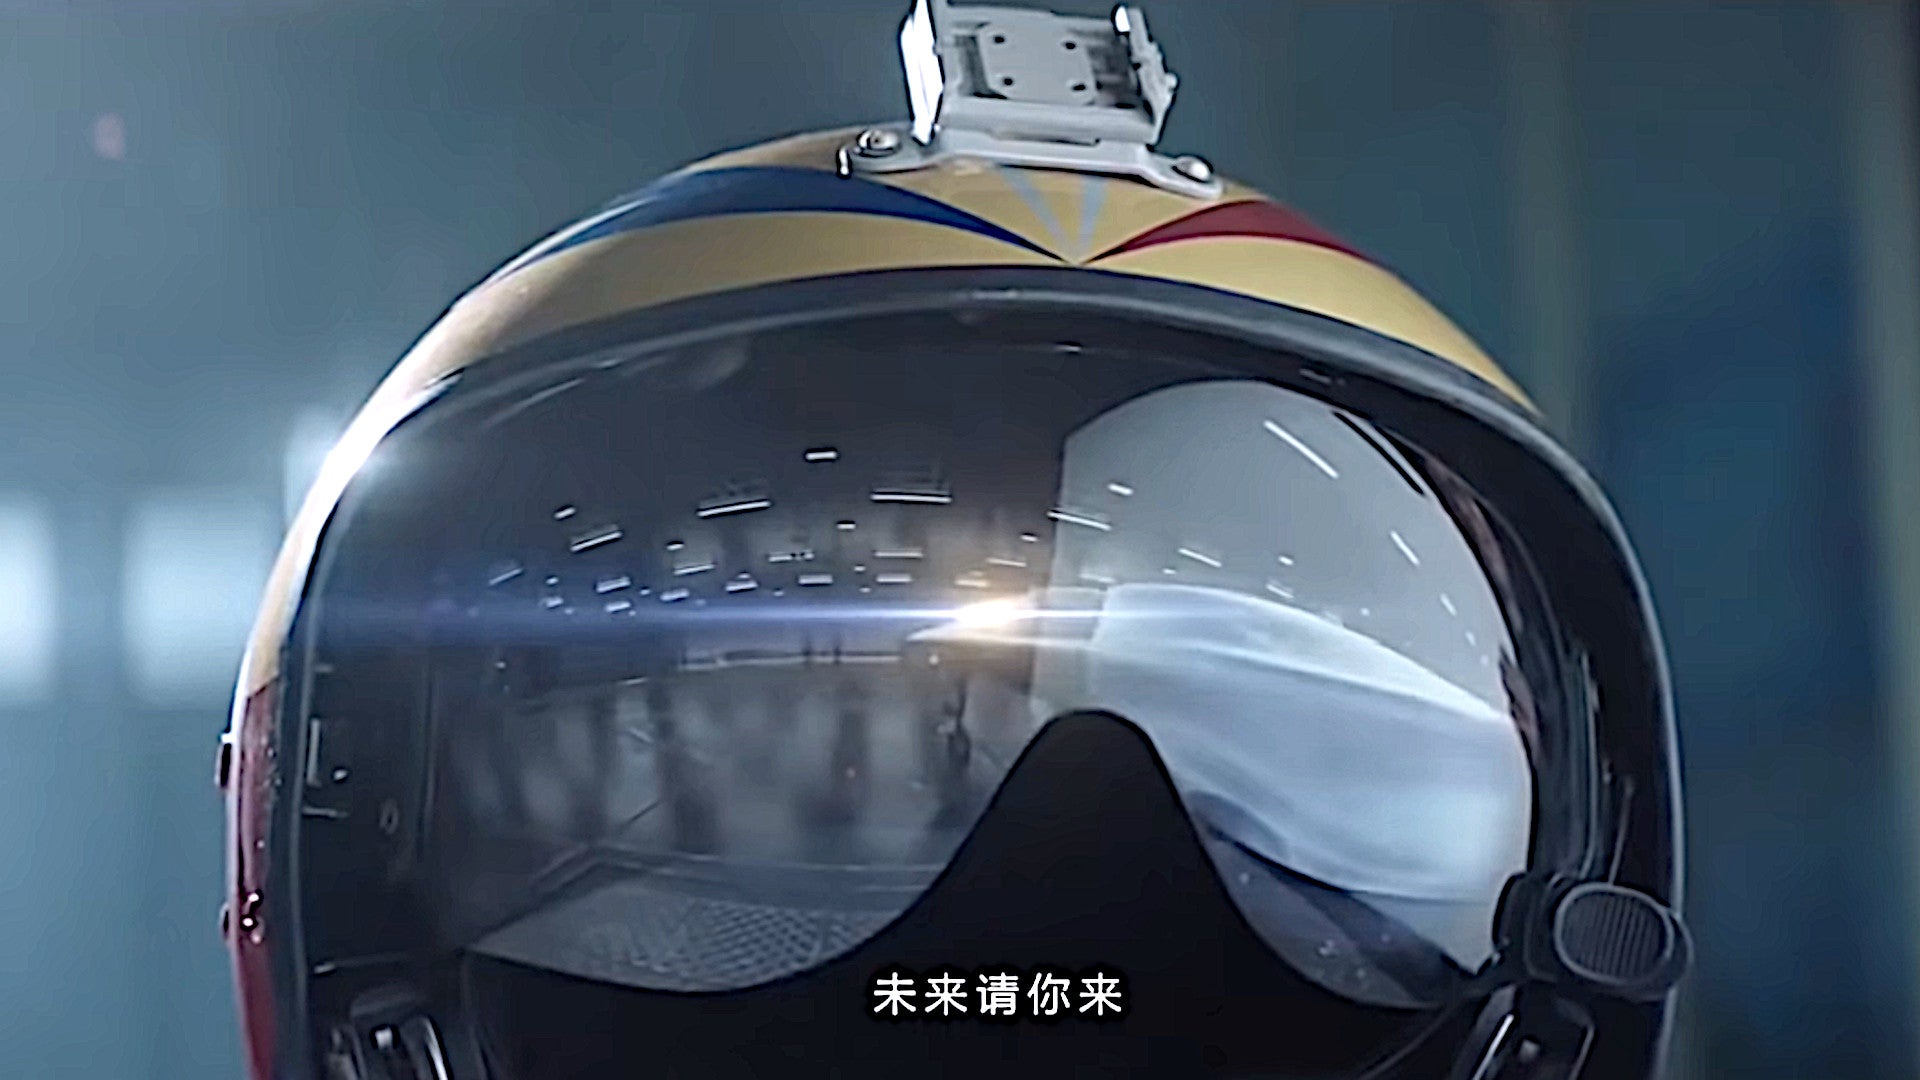 First Official Rendering Of China’s H-20 Stealth Bomber Emerges In Glitzy Recruiting Video